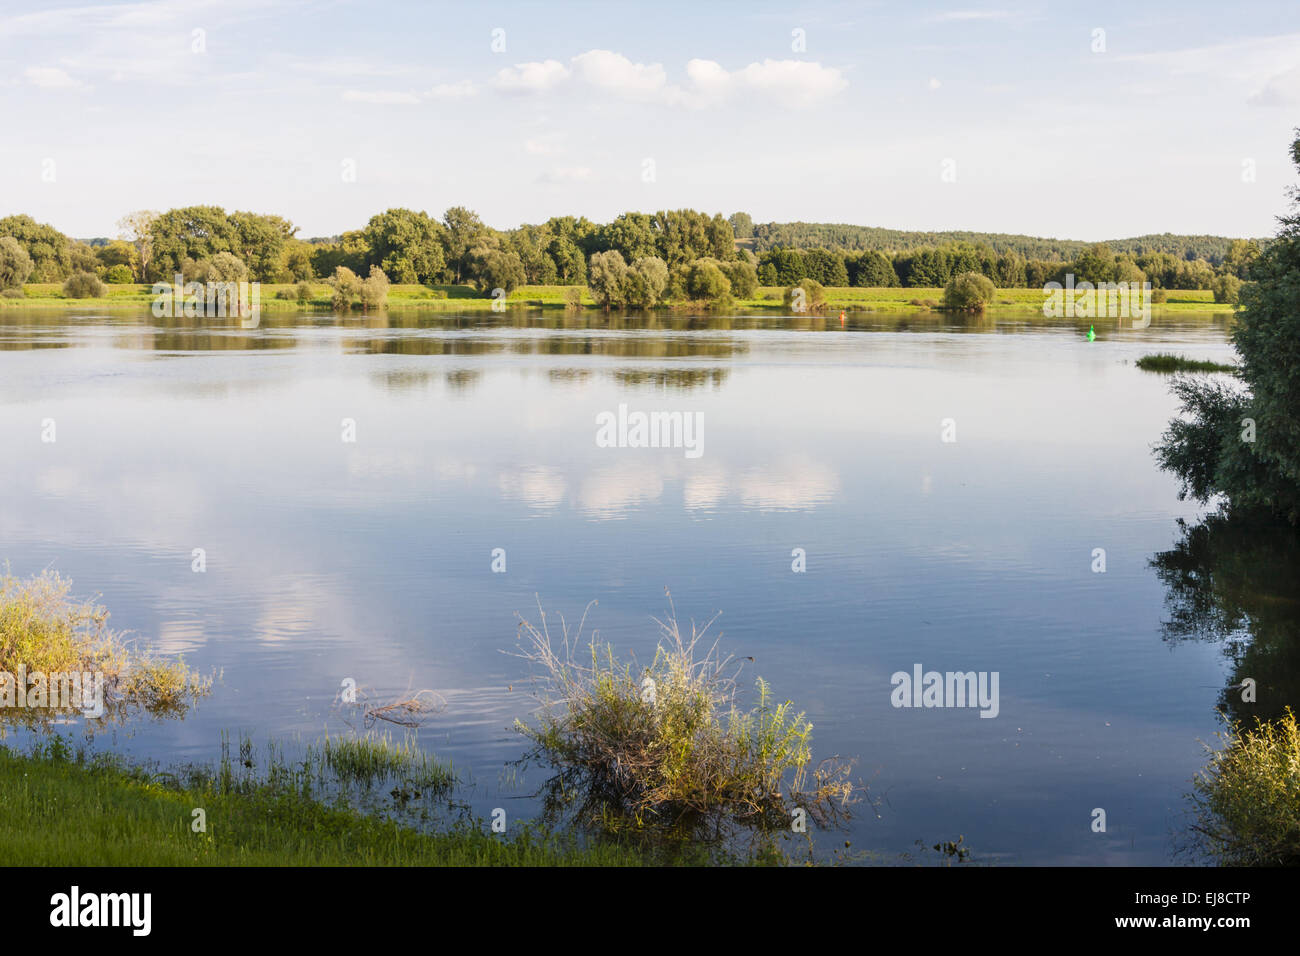 River Oder between Germany and Poland Stock Photo